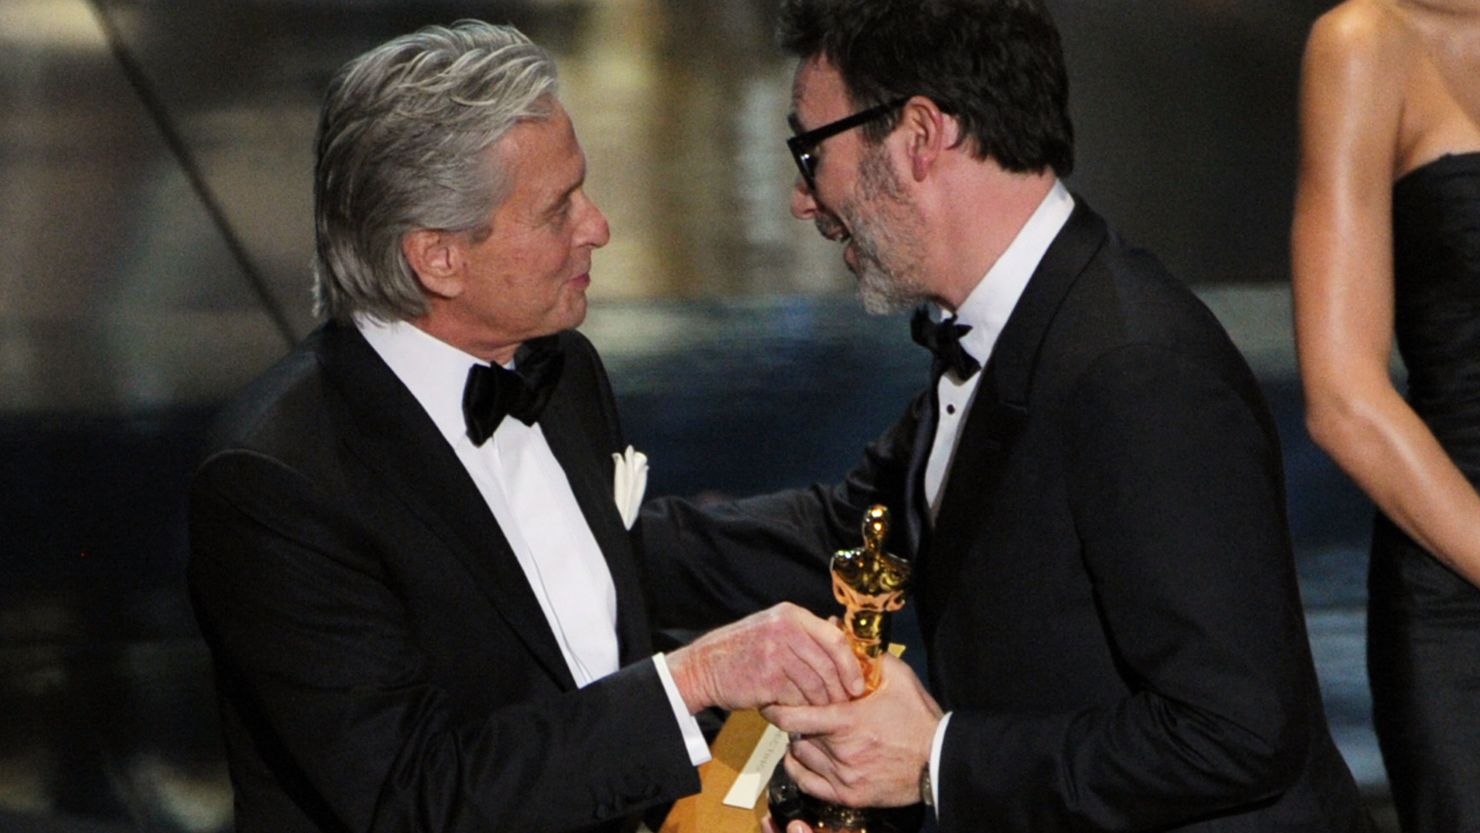 Michel Hazanavicius accepts the Best Director award for "The Artist" from presenter Michael Douglas on Sunday night.